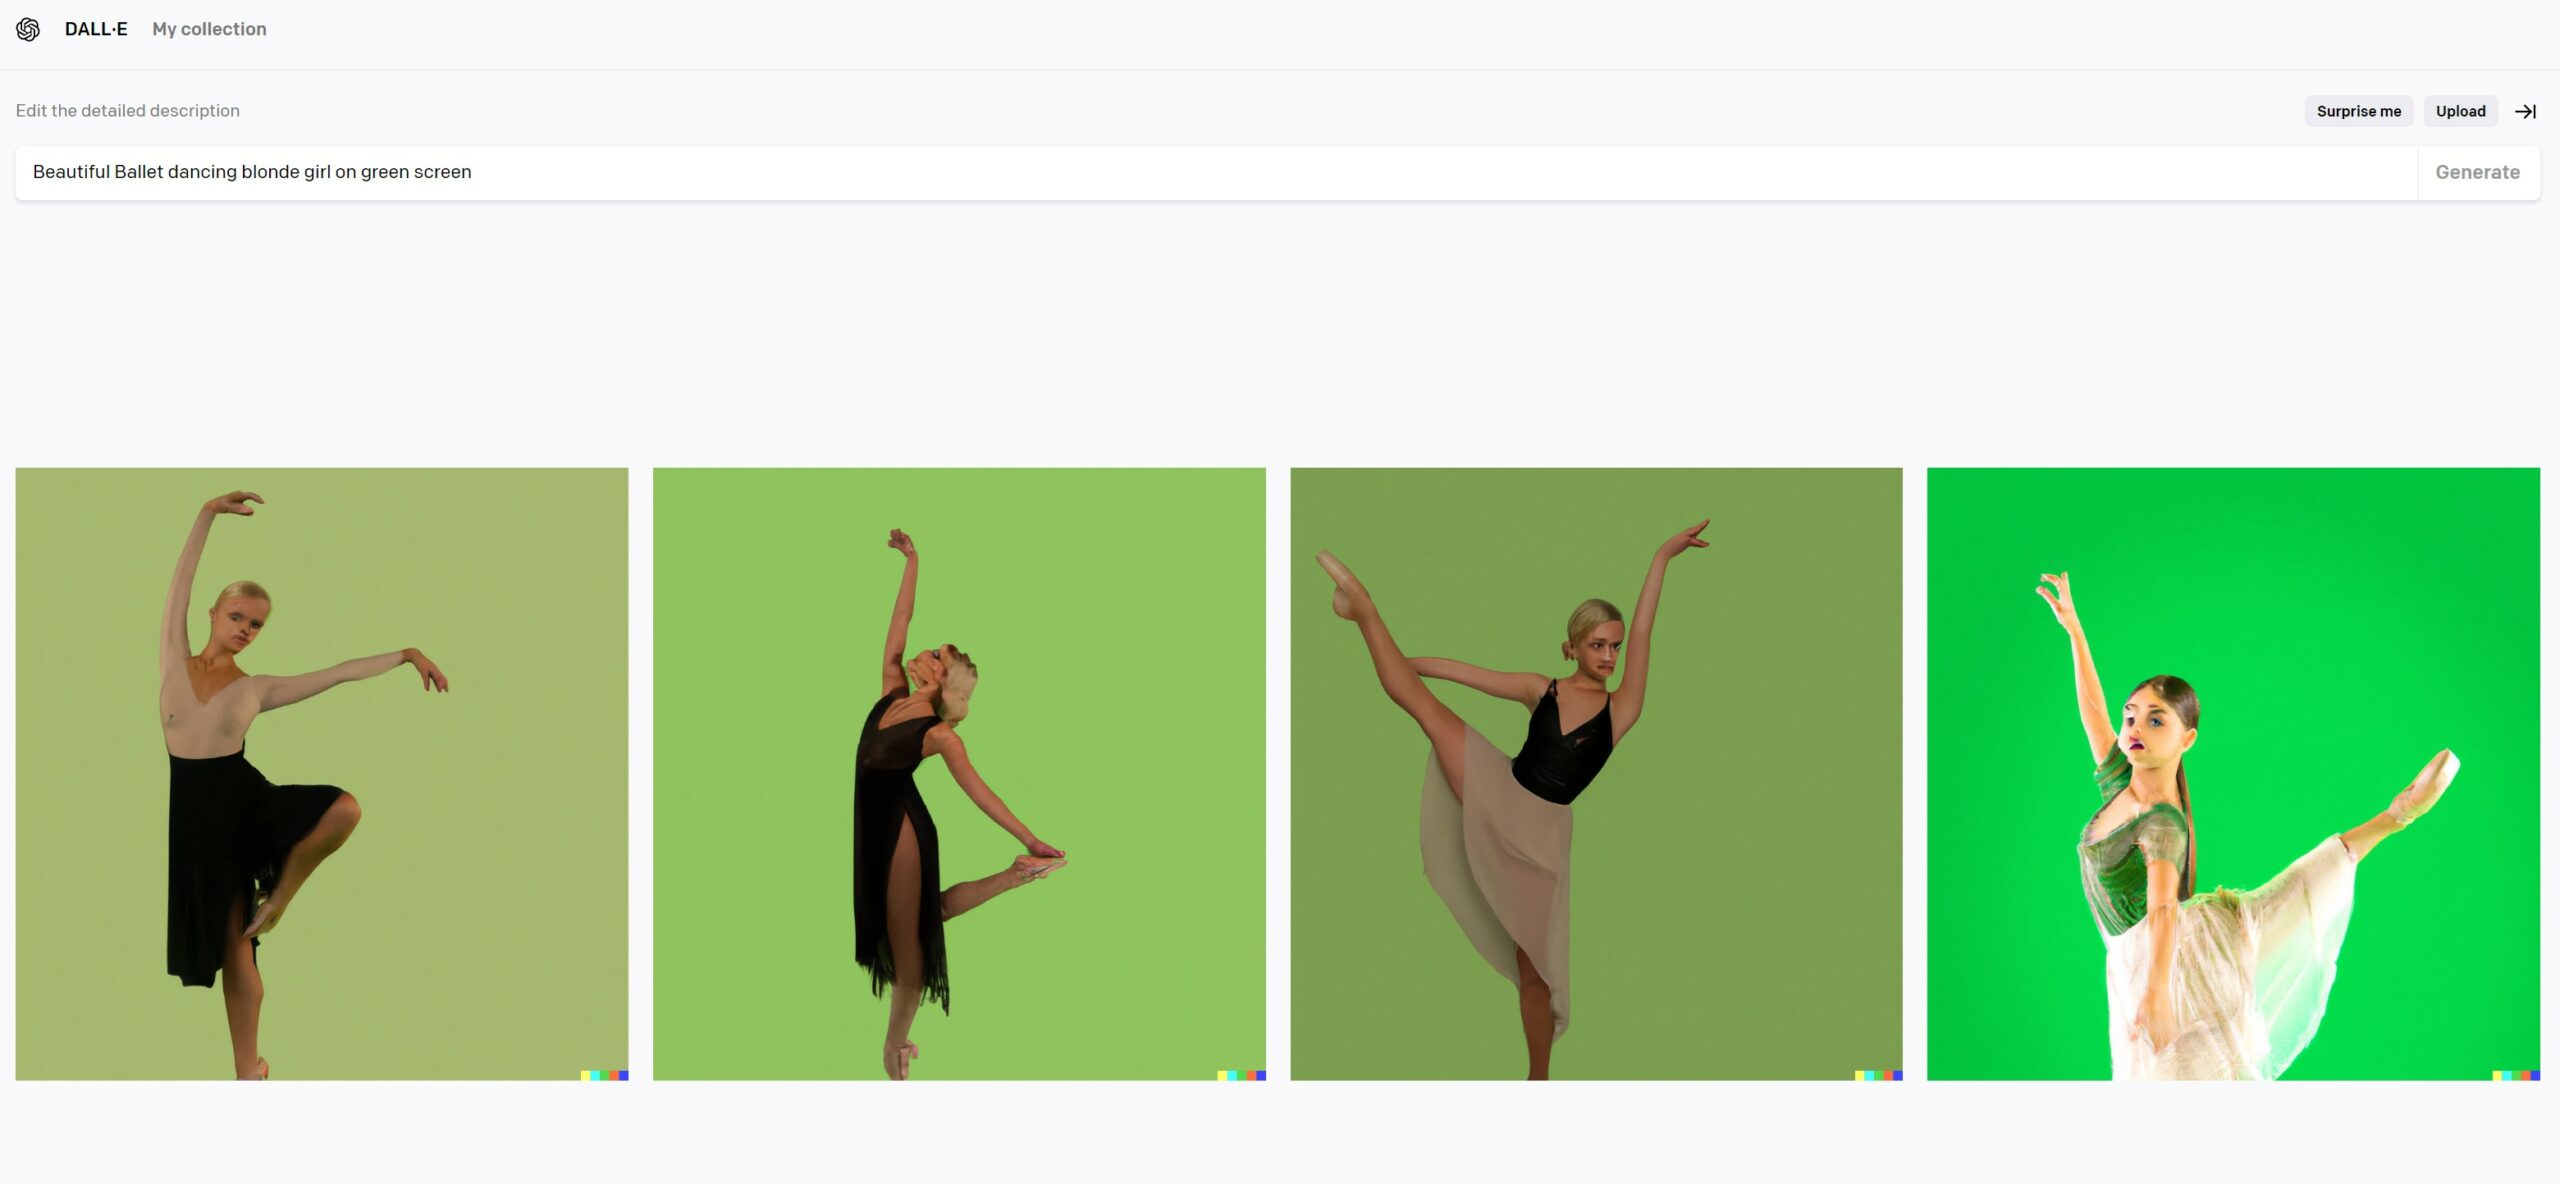 Beautiful Ballet dancing blonde girl on green screen generated by AI